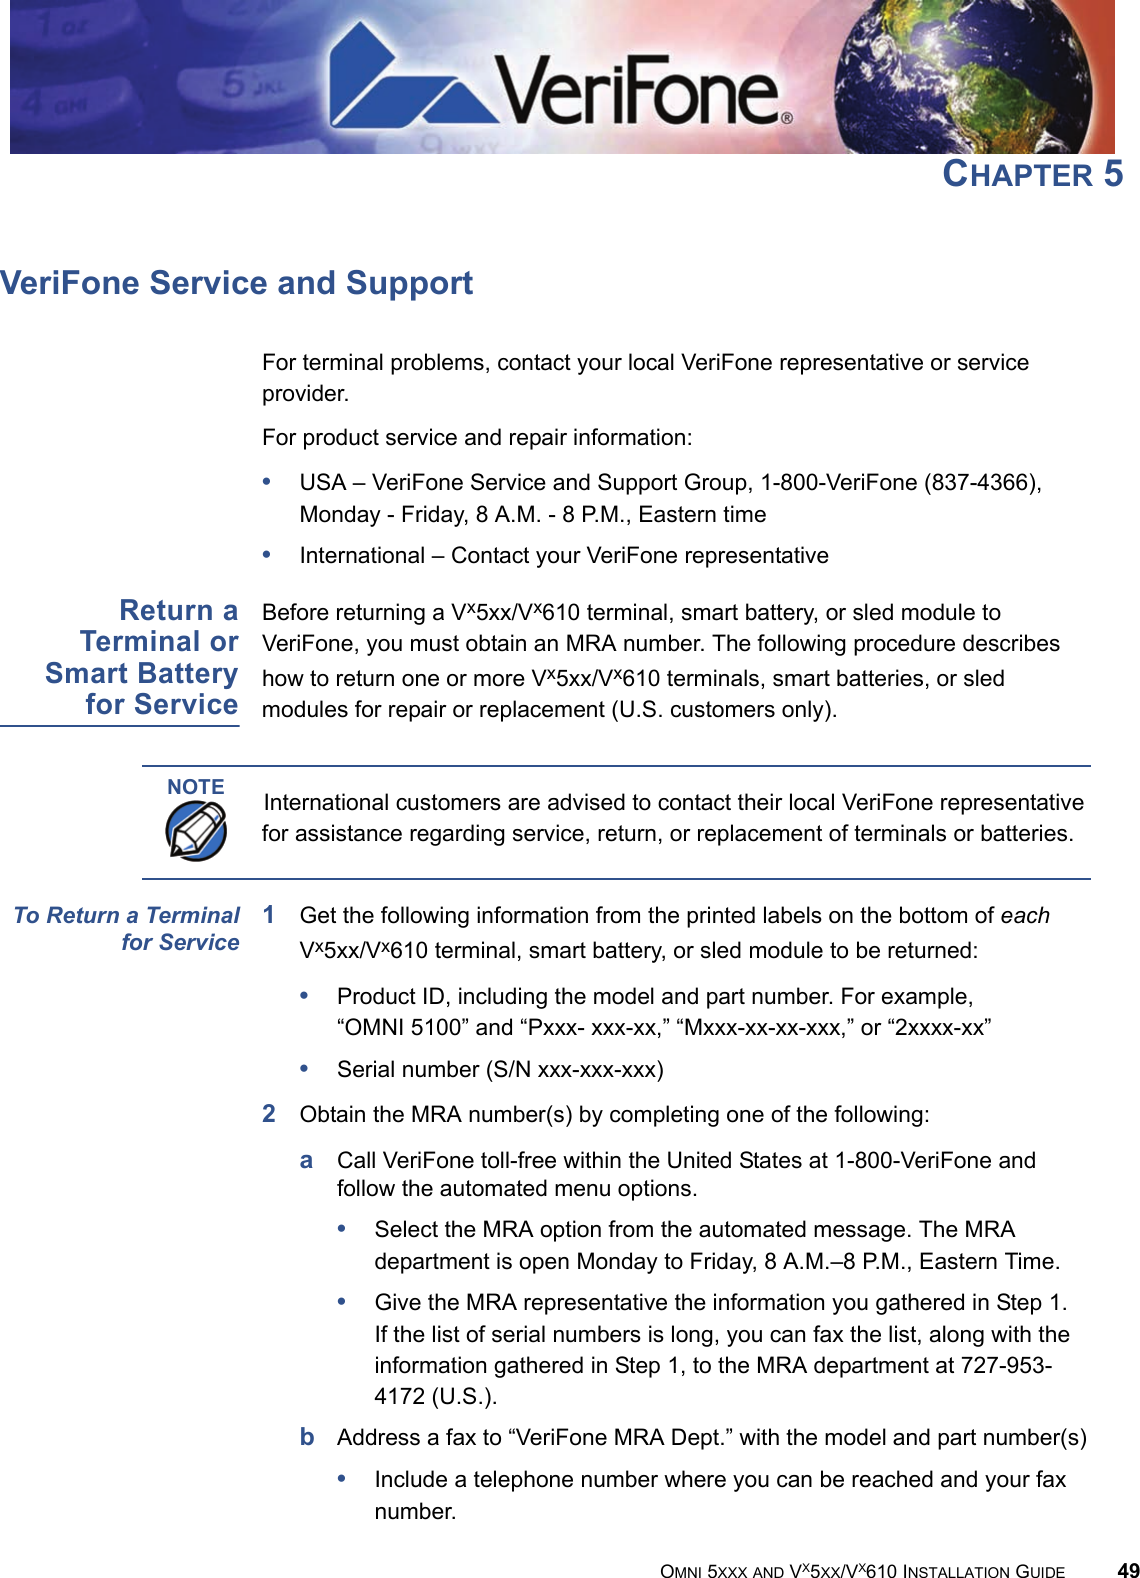 OMNI 5XXX AND VX5XX/VX610 INSTALLATION GUIDE 49CHAPTER 5VeriFone Service and SupportFor terminal problems, contact your local VeriFone representative or service provider. For product service and repair information:•USA – VeriFone Service and Support Group, 1-800-VeriFone (837-4366), Monday - Friday, 8 A.M. - 8 P.M., Eastern time•International – Contact your VeriFone representative Return aTerminal orSmart Batteryfor ServiceBefore returning a Vx5xx/Vx610 terminal, smart battery, or sled module to VeriFone, you must obtain an MRA number. The following procedure describes how to return one or more Vx5xx/Vx610 terminals, smart batteries, or sled modules for repair or replacement (U.S. customers only). To Return a Terminalfor Service1Get the following information from the printed labels on the bottom of each Vx5xx/Vx610 terminal, smart battery, or sled module to be returned:•Product ID, including the model and part number. For example, “OMNI 5100” and “Pxxx- xxx-xx,” “Mxxx-xx-xx-xxx,” or “2xxxx-xx”•Serial number (S/N xxx-xxx-xxx)2Obtain the MRA number(s) by completing one of the following:aCall VeriFone toll-free within the United States at 1-800-VeriFone and follow the automated menu options.•Select the MRA option from the automated message. The MRA department is open Monday to Friday, 8 A.M.–8 P.M., Eastern Time.•Give the MRA representative the information you gathered in Step 1.If the list of serial numbers is long, you can fax the list, along with the information gathered in Step 1, to the MRA department at 727-953-4172 (U.S.).bAddress a fax to “VeriFone MRA Dept.” with the model and part number(s)•Include a telephone number where you can be reached and your fax number.NOTE International customers are advised to contact their local VeriFone representative for assistance regarding service, return, or replacement of terminals or batteries.